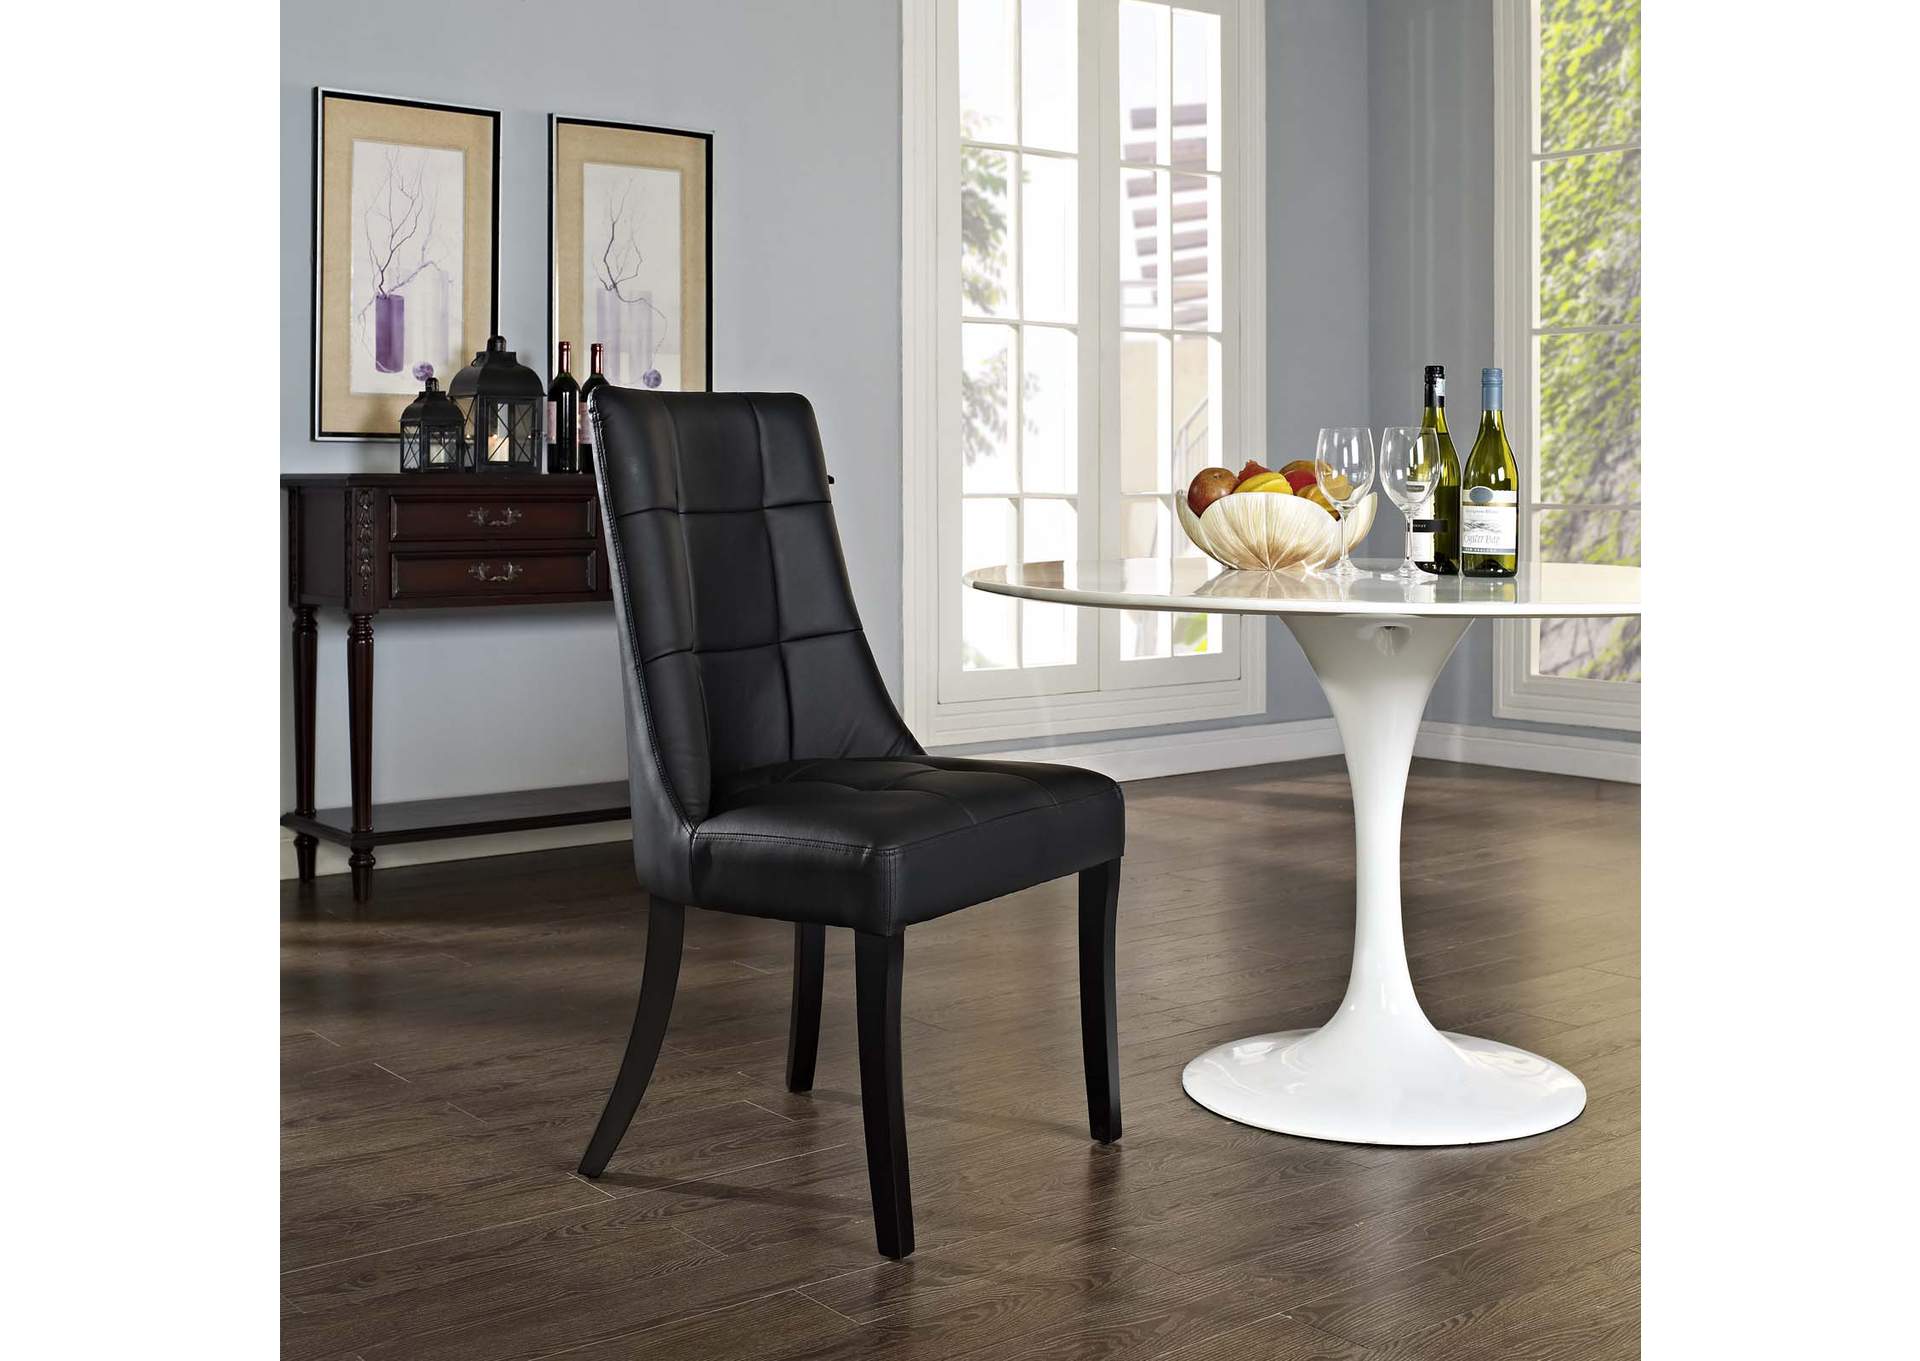 Black Noblesse Dining Vinyl Side Chair,Modway